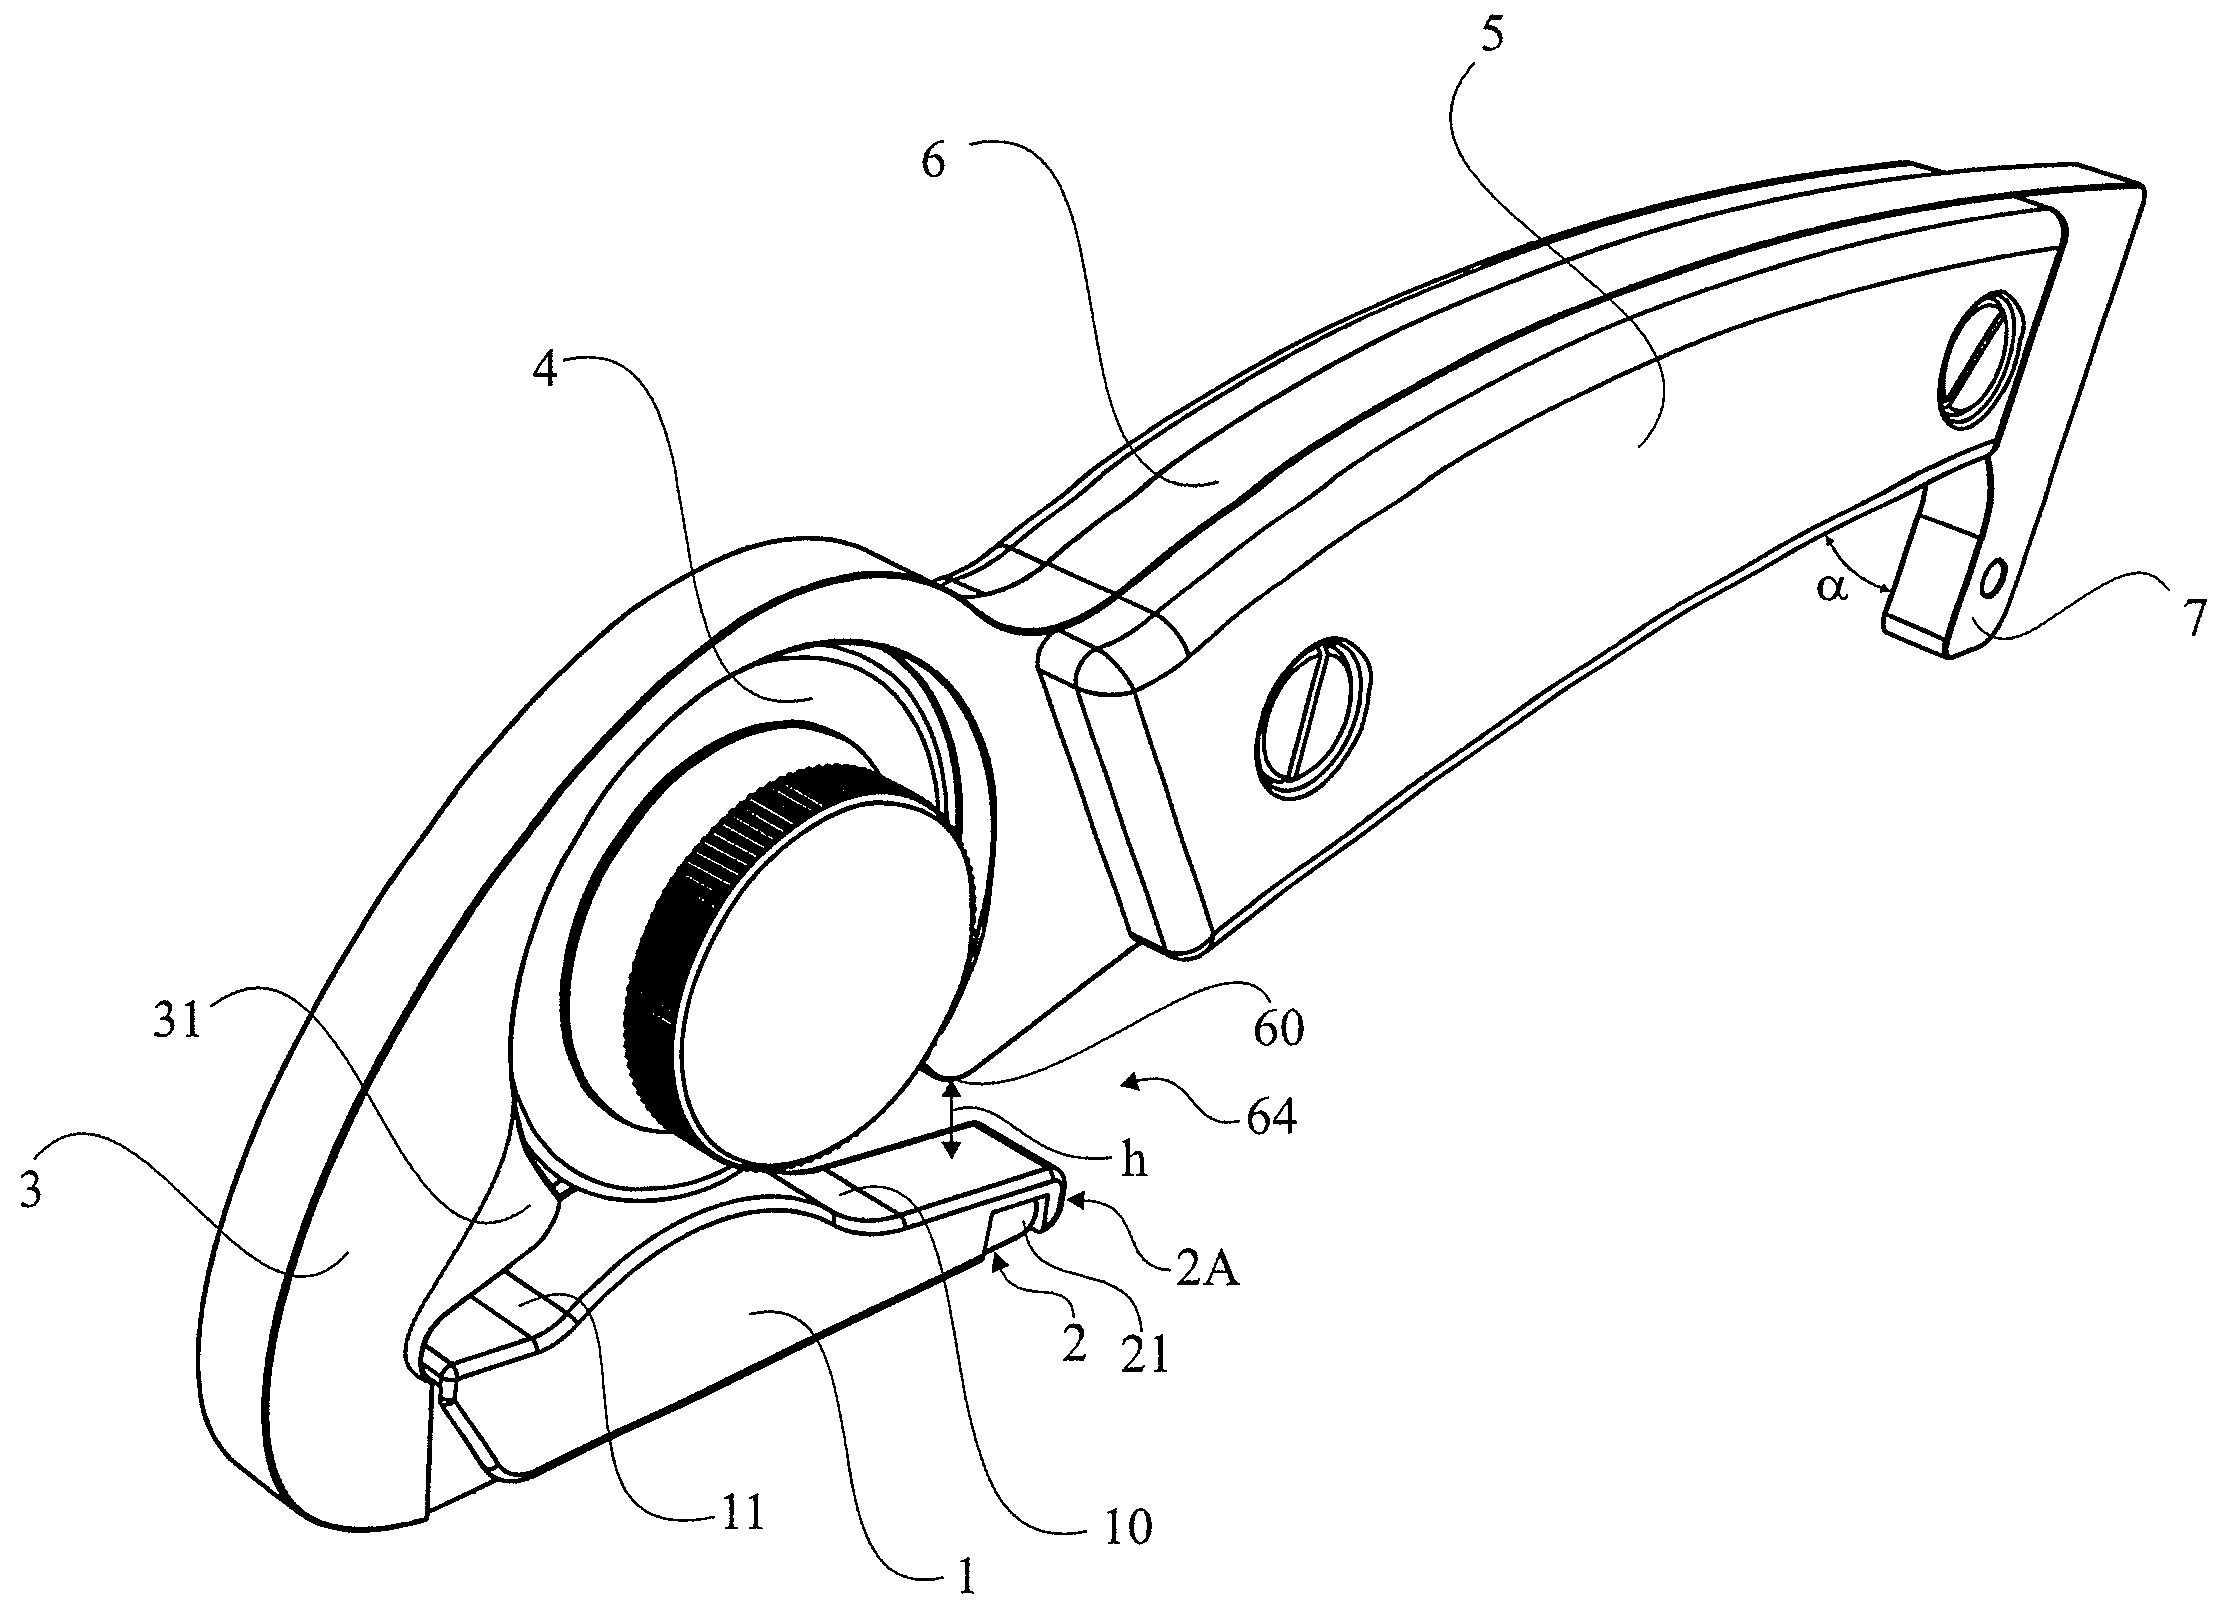 Hand-held cutting device